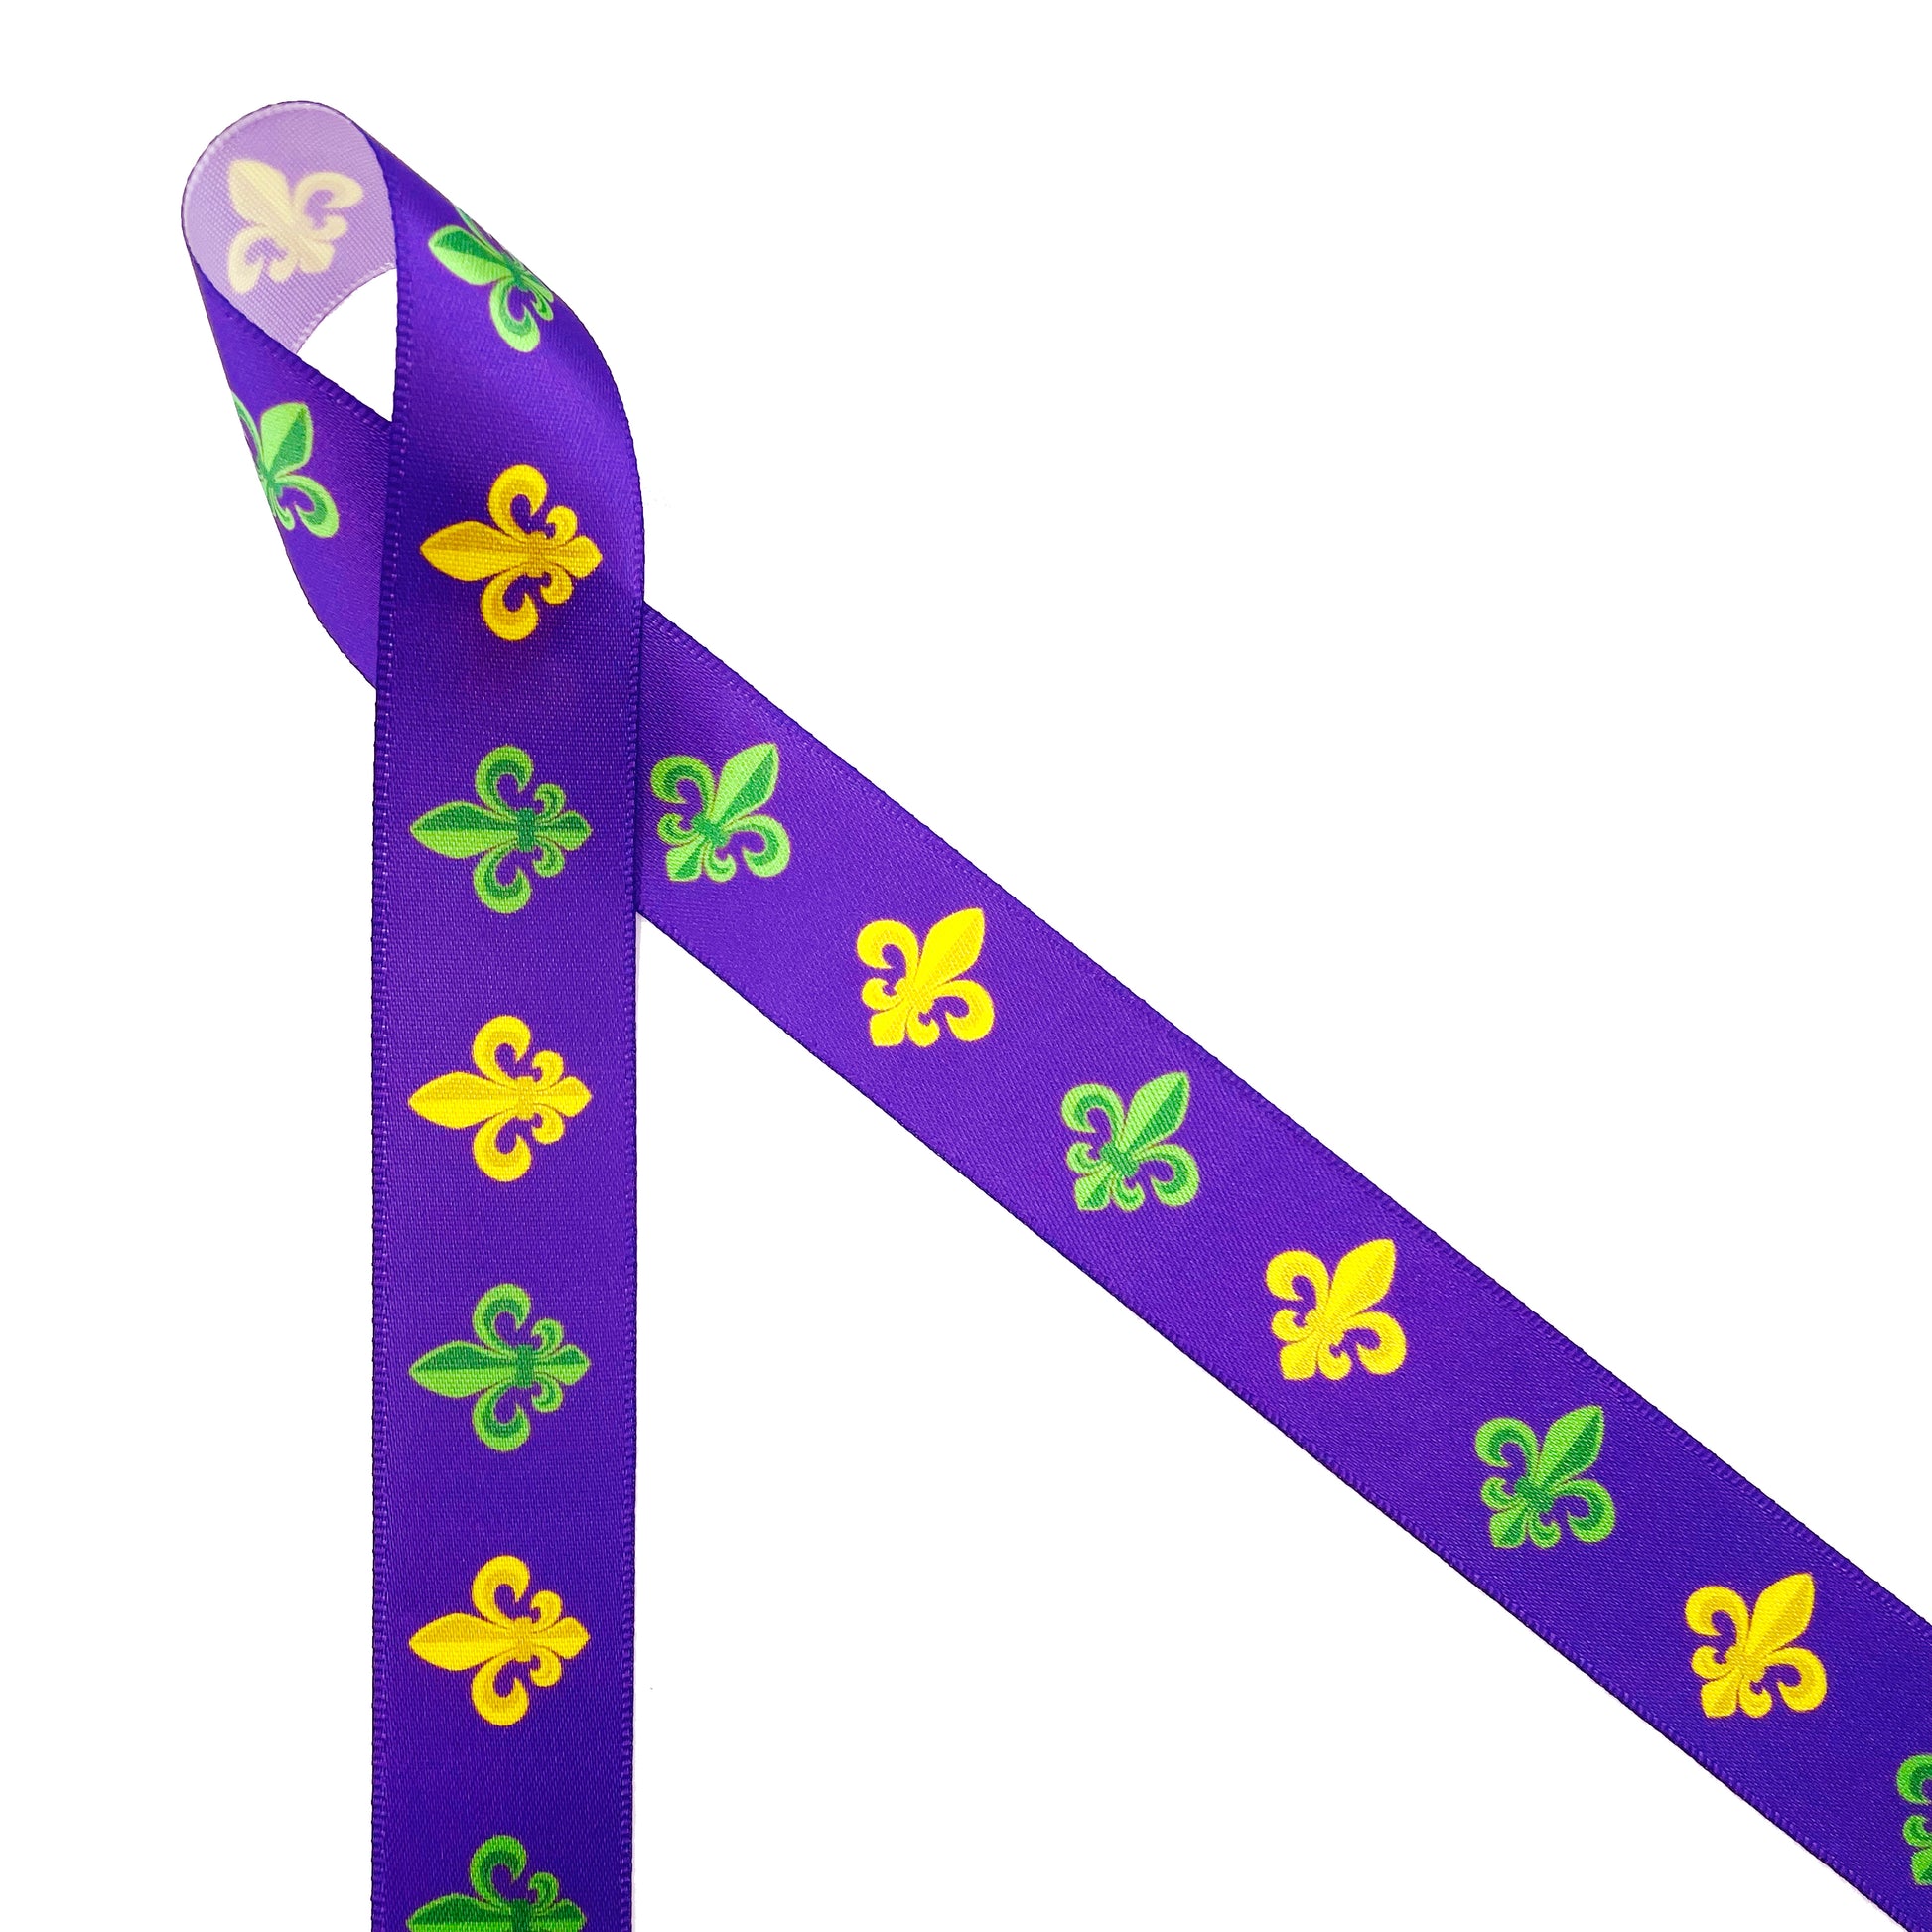 Mardi Gras Ribbon stripes perfect for party decor, gift wrap, cookies,  candy, sweet shops, party favors, headbands printed on 7/8 grosgrain